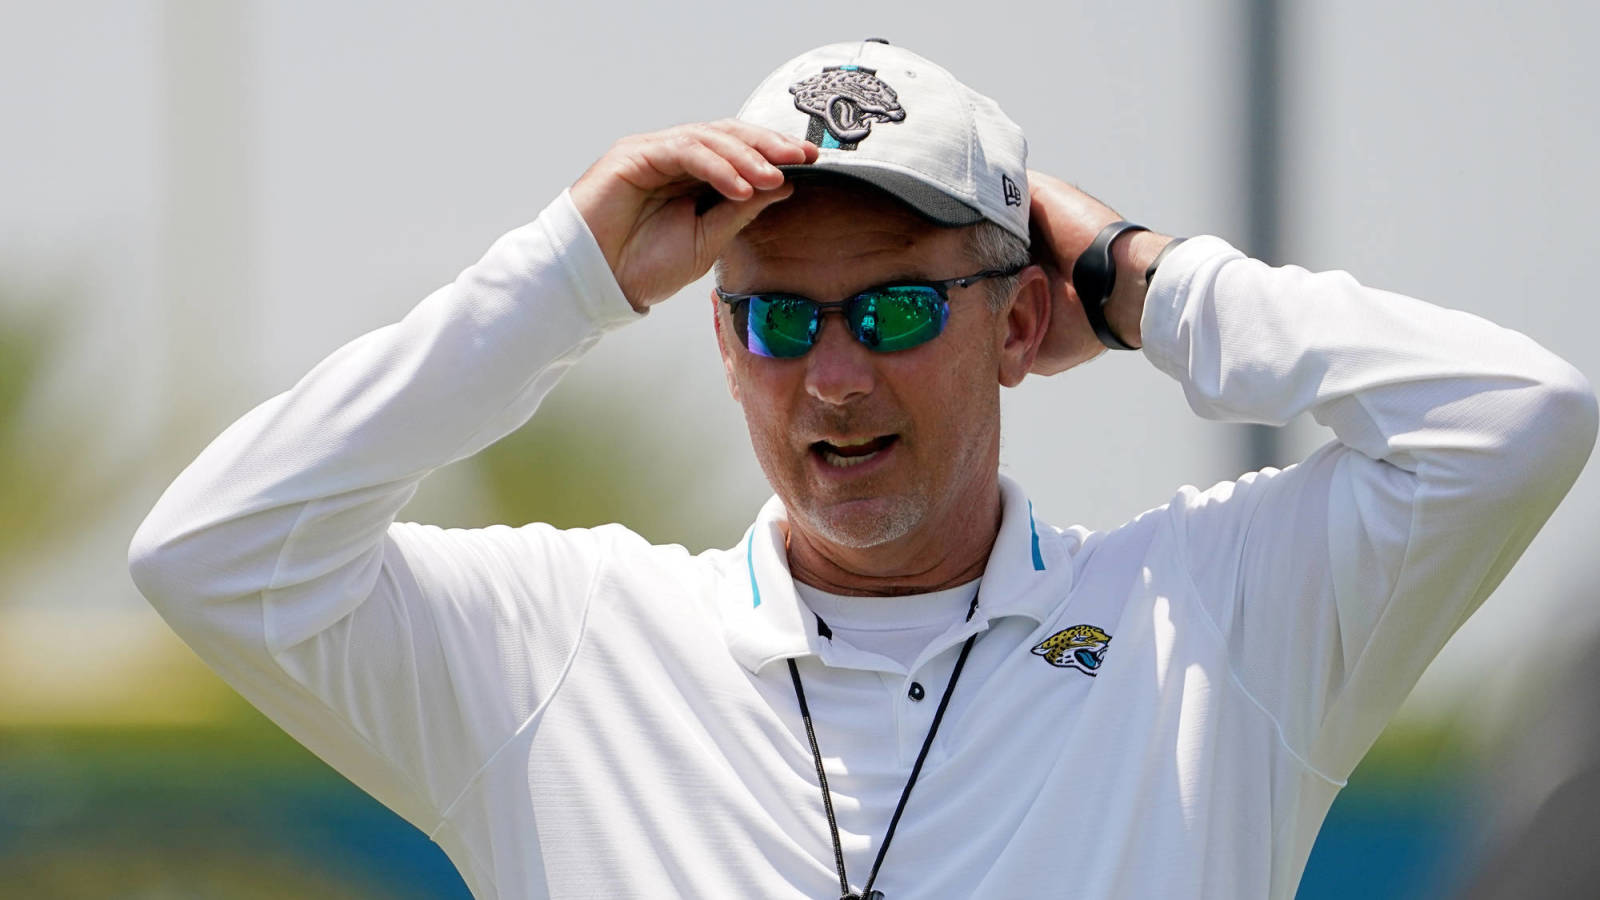 Some Jaguars assistants received COVID-19 vaccine shots to avoid losing Tier 1 status